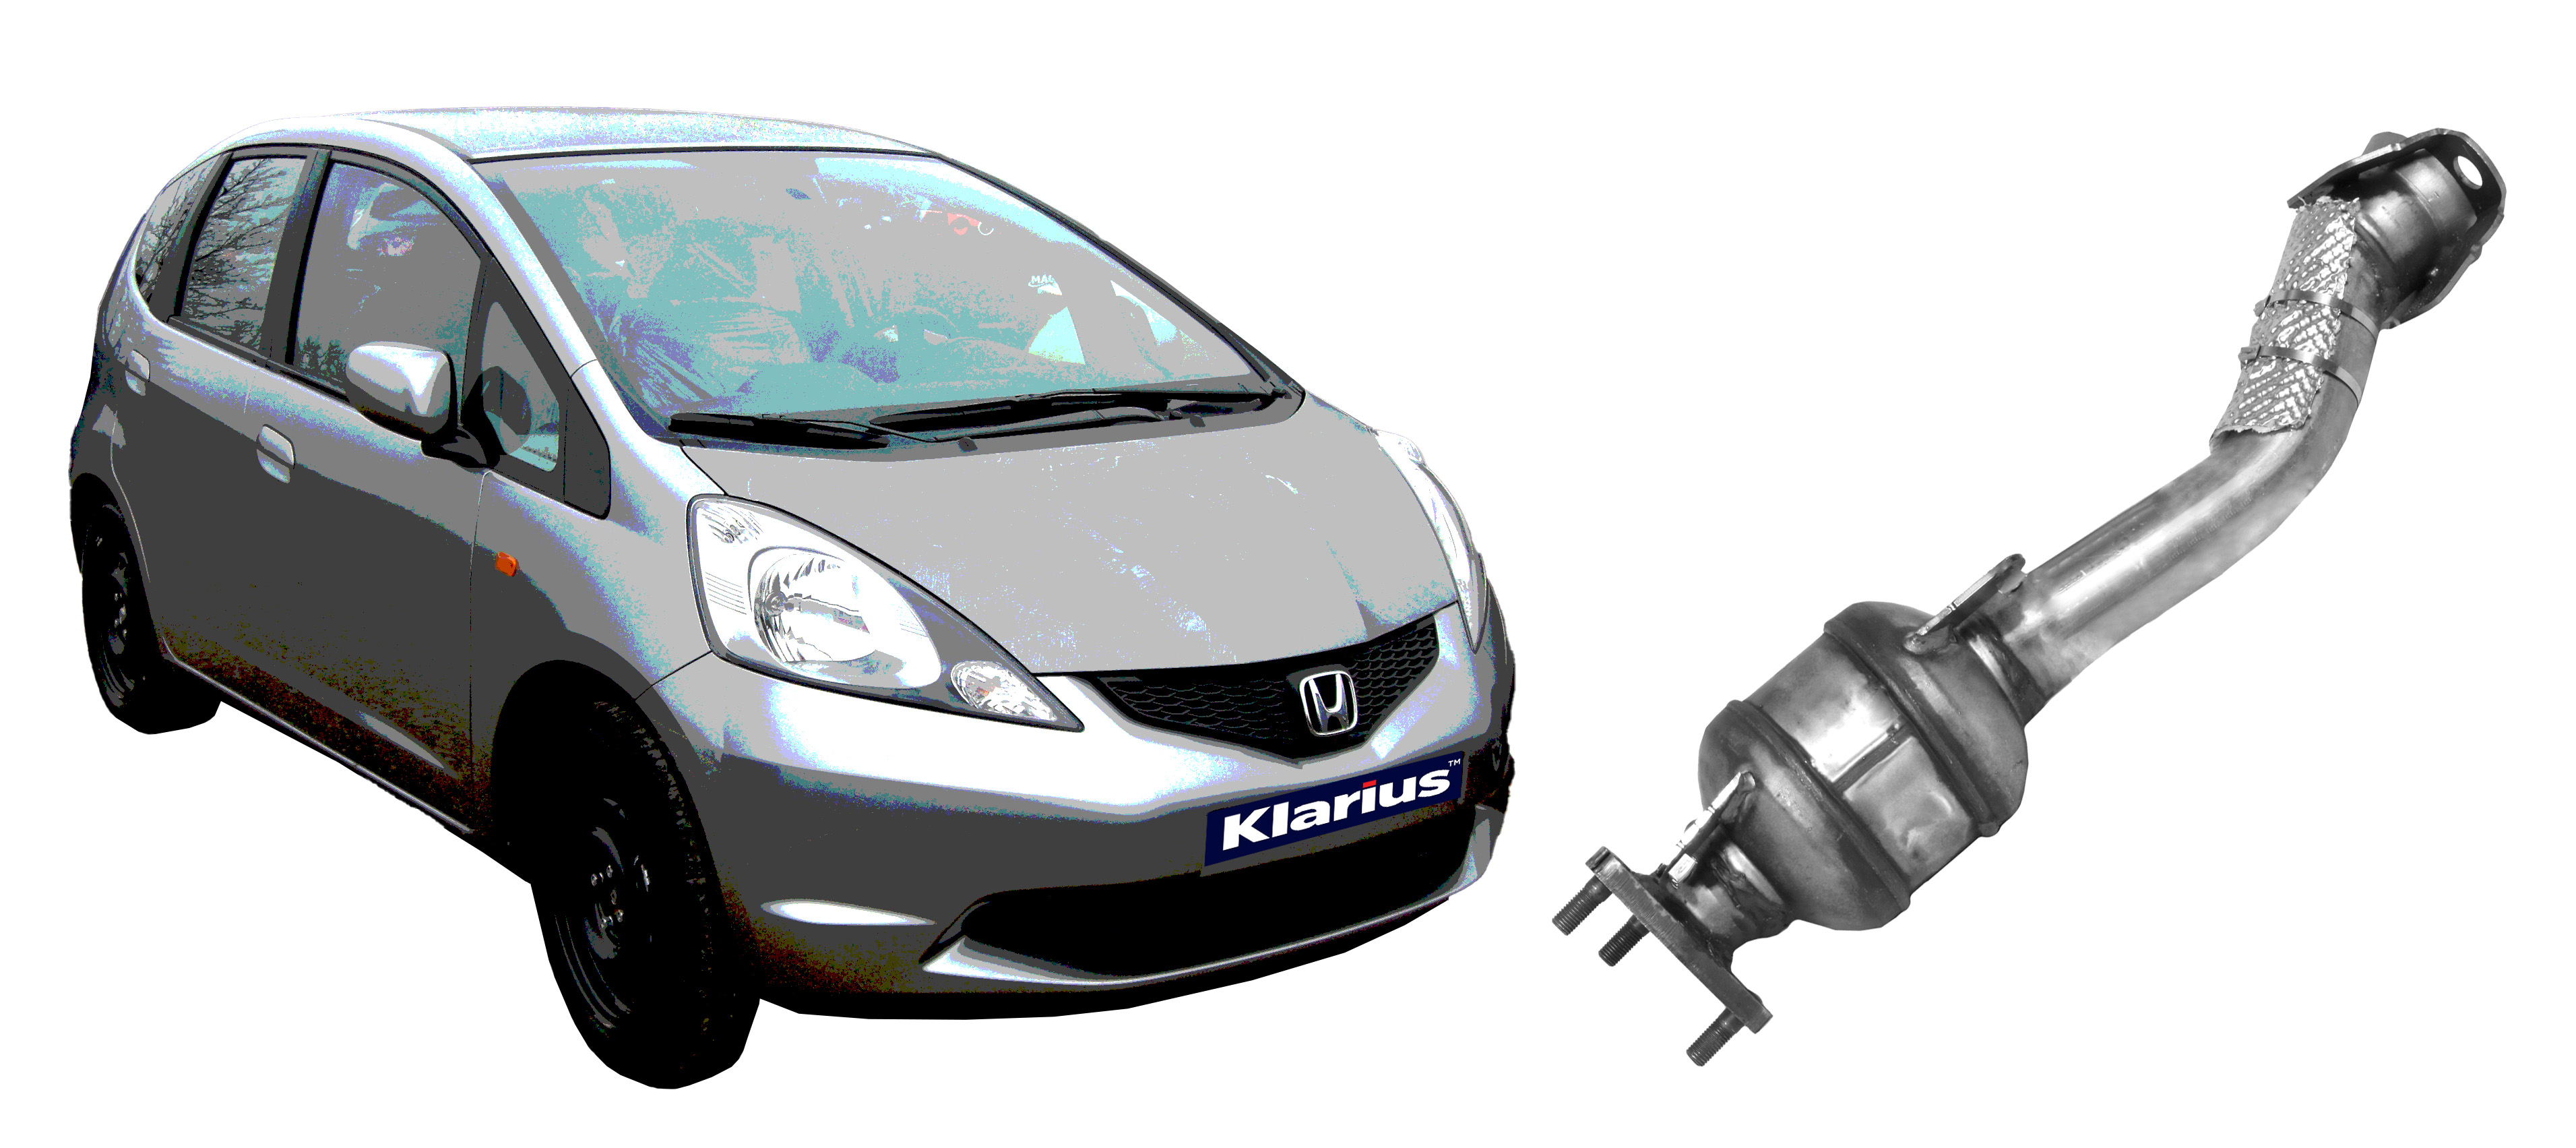 Klarius' new parts release includes support for the Honda Jazz, models 2009 - 2015